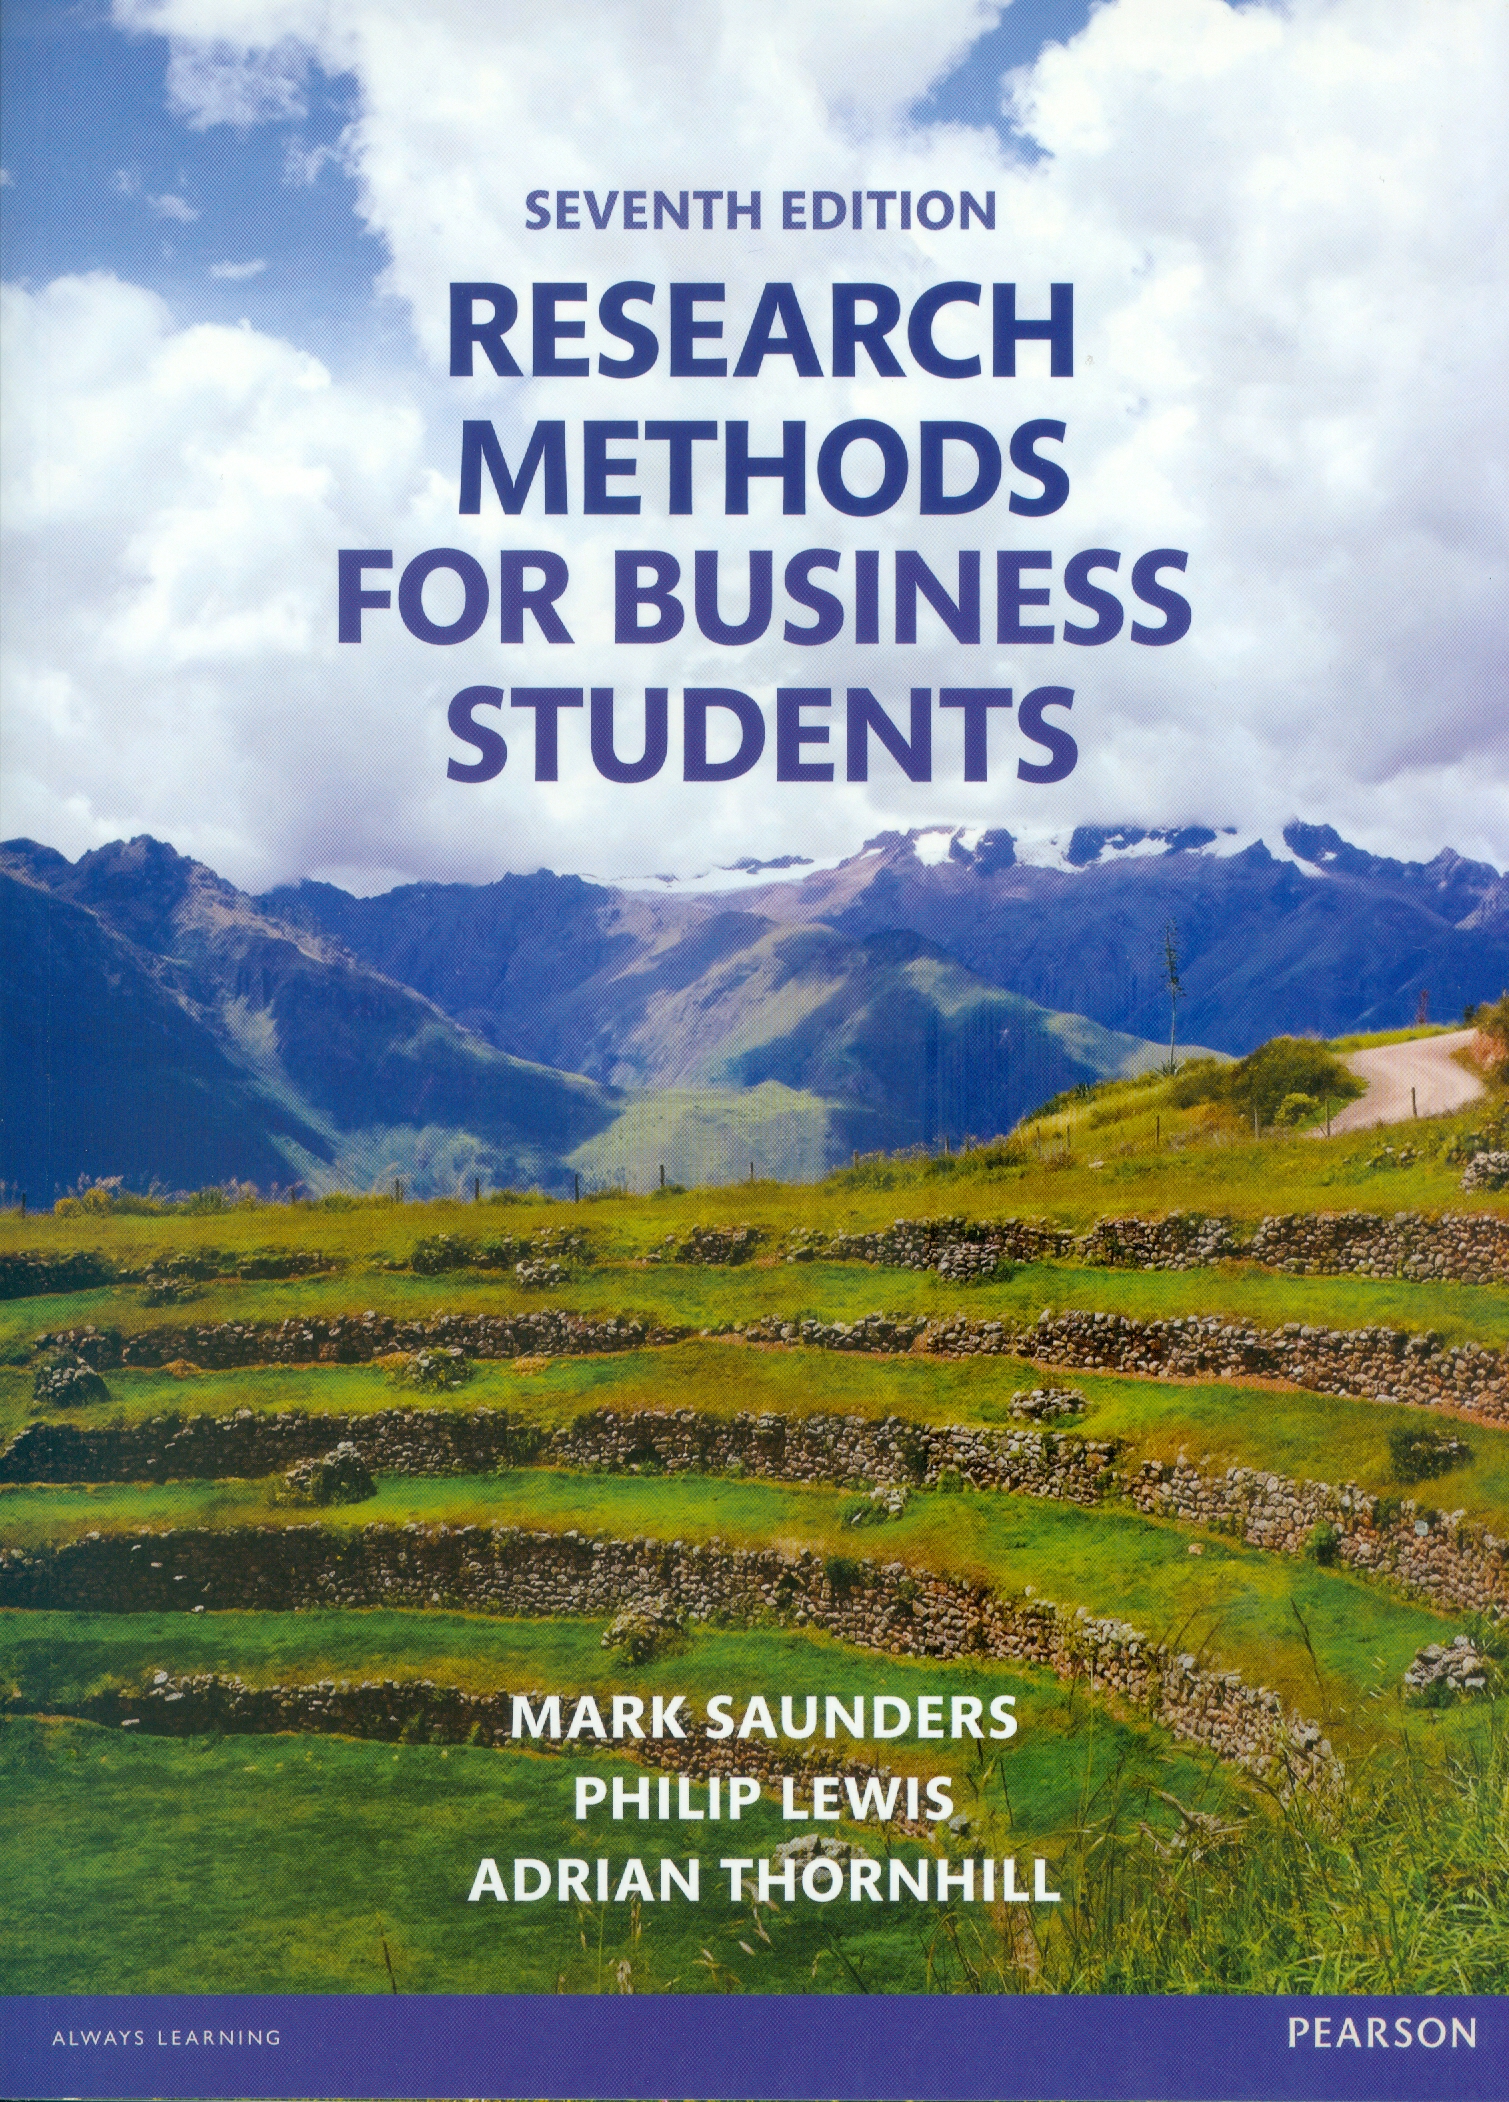 Research Methods for Business Students0001.jpg